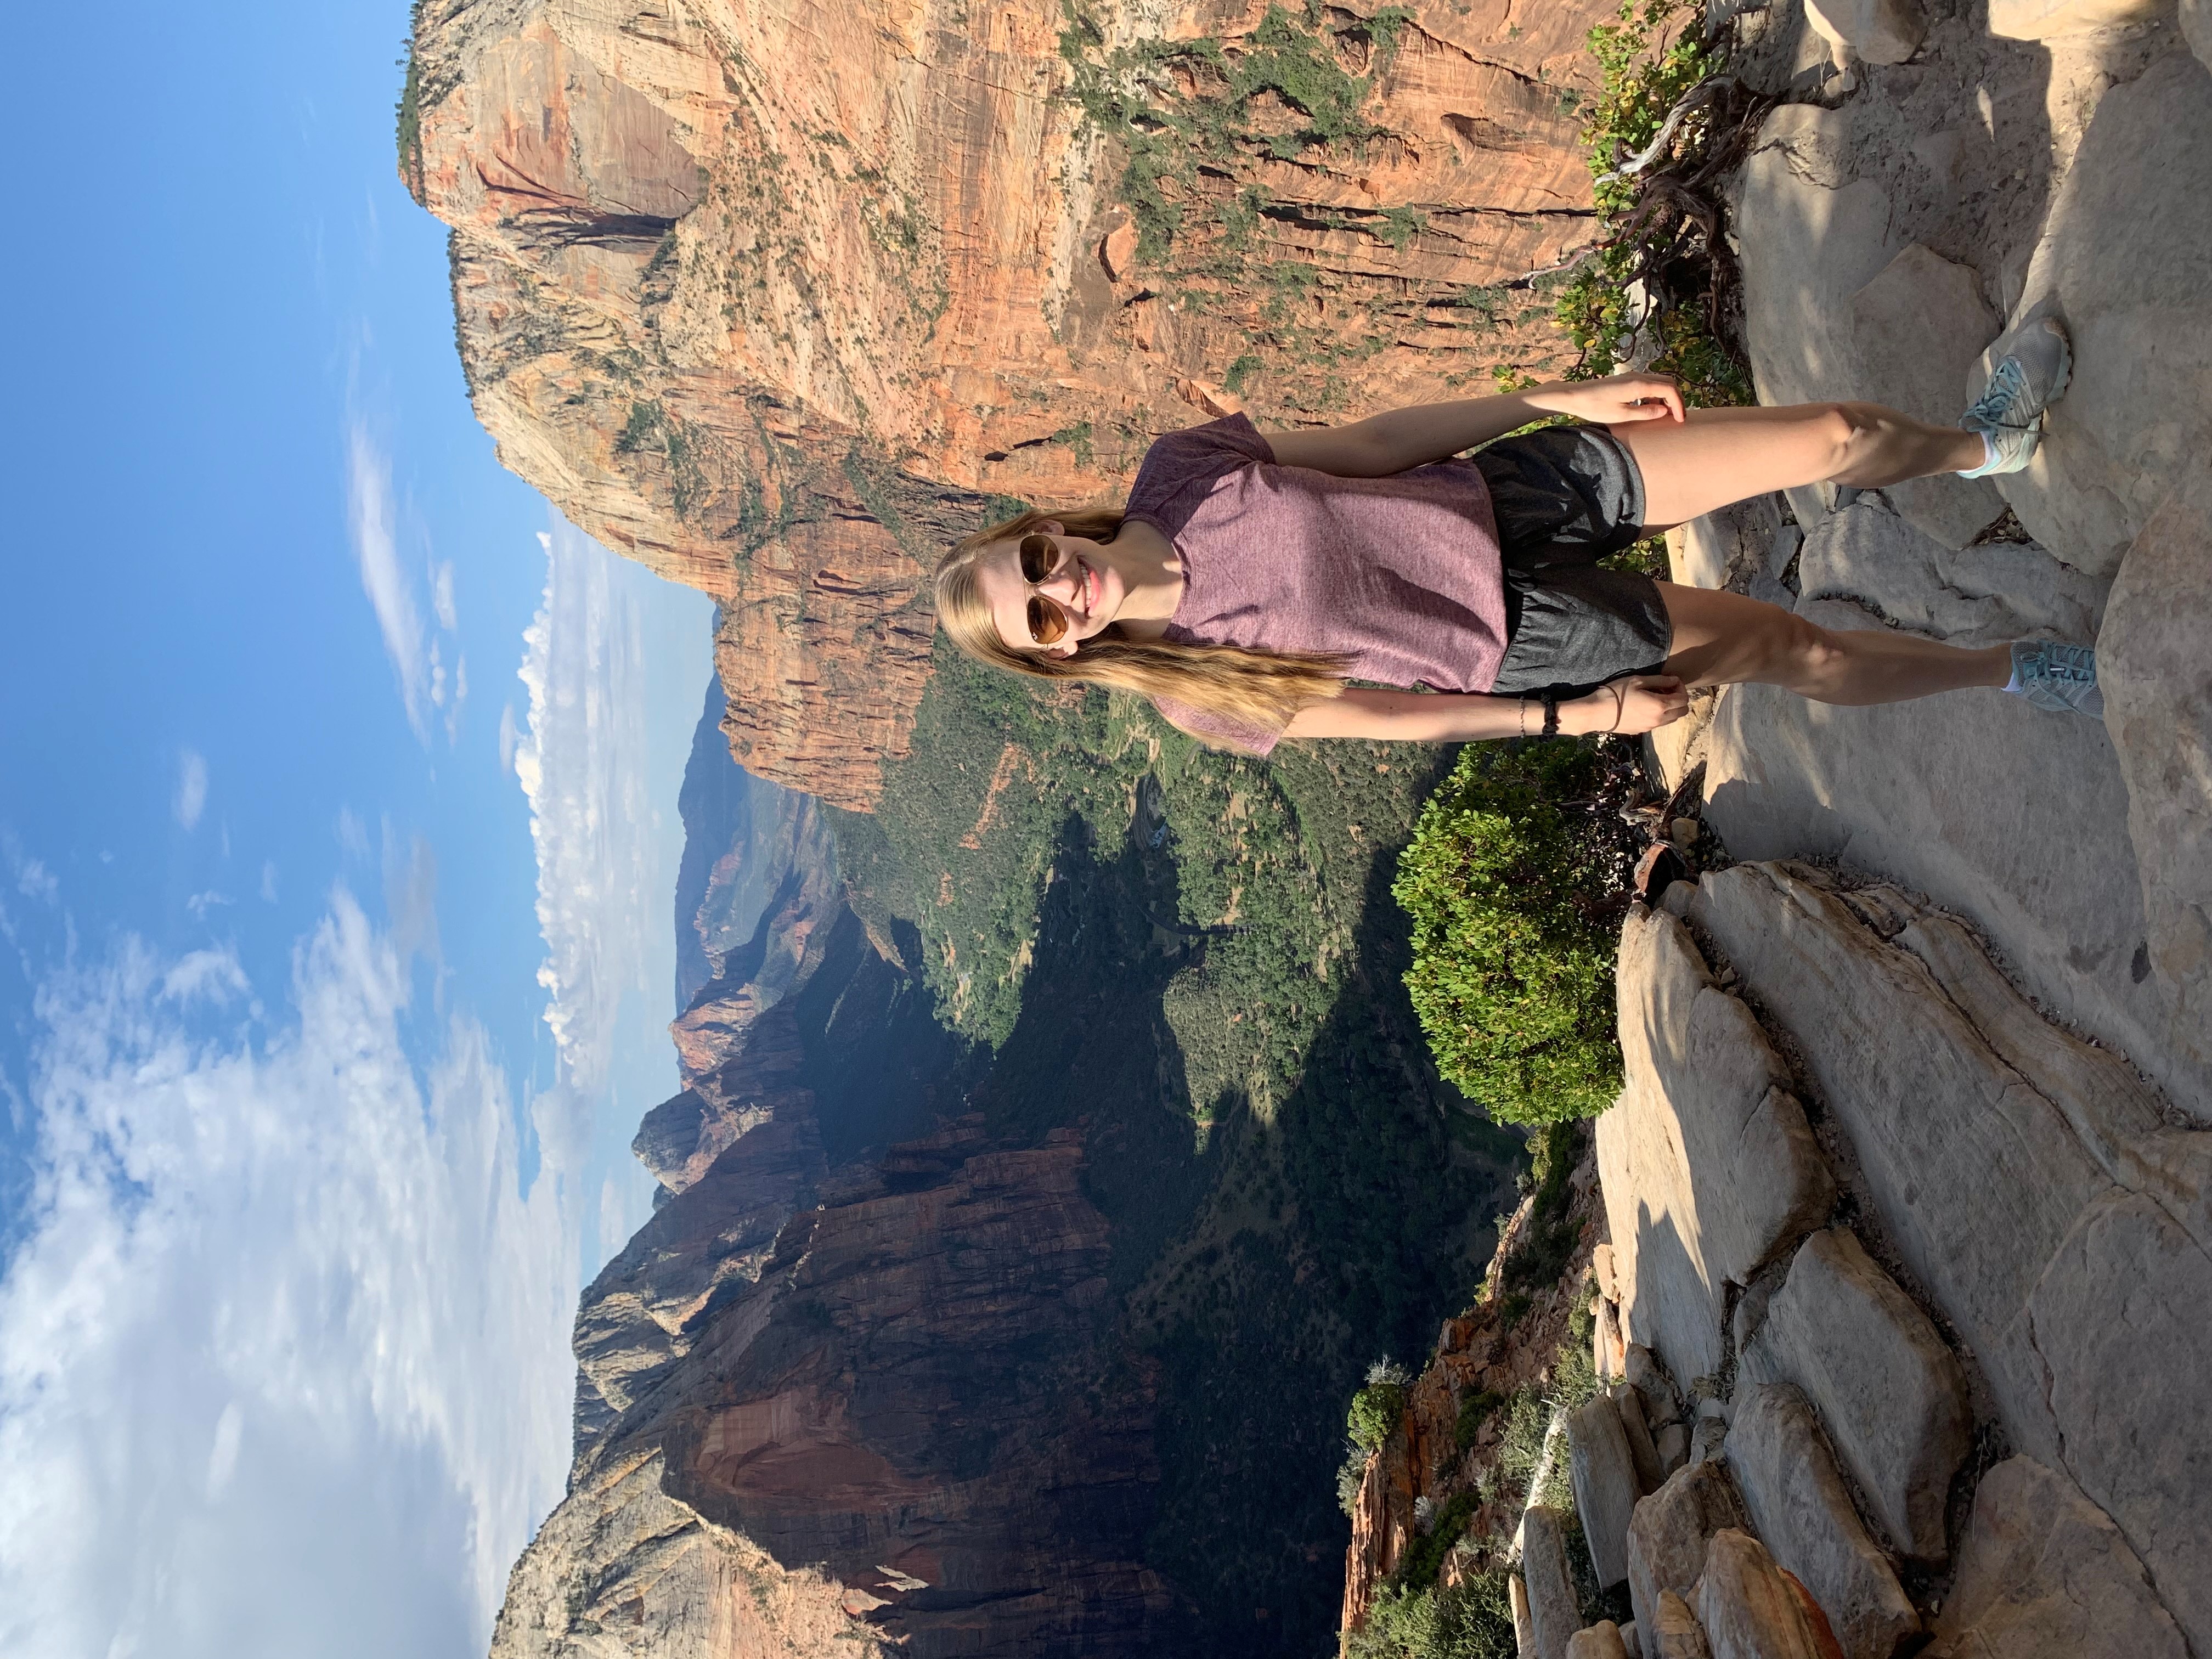  Juliette Sweeney hiked Angel's Landing in Zion National Park, which is known as the scariest hike in America. 